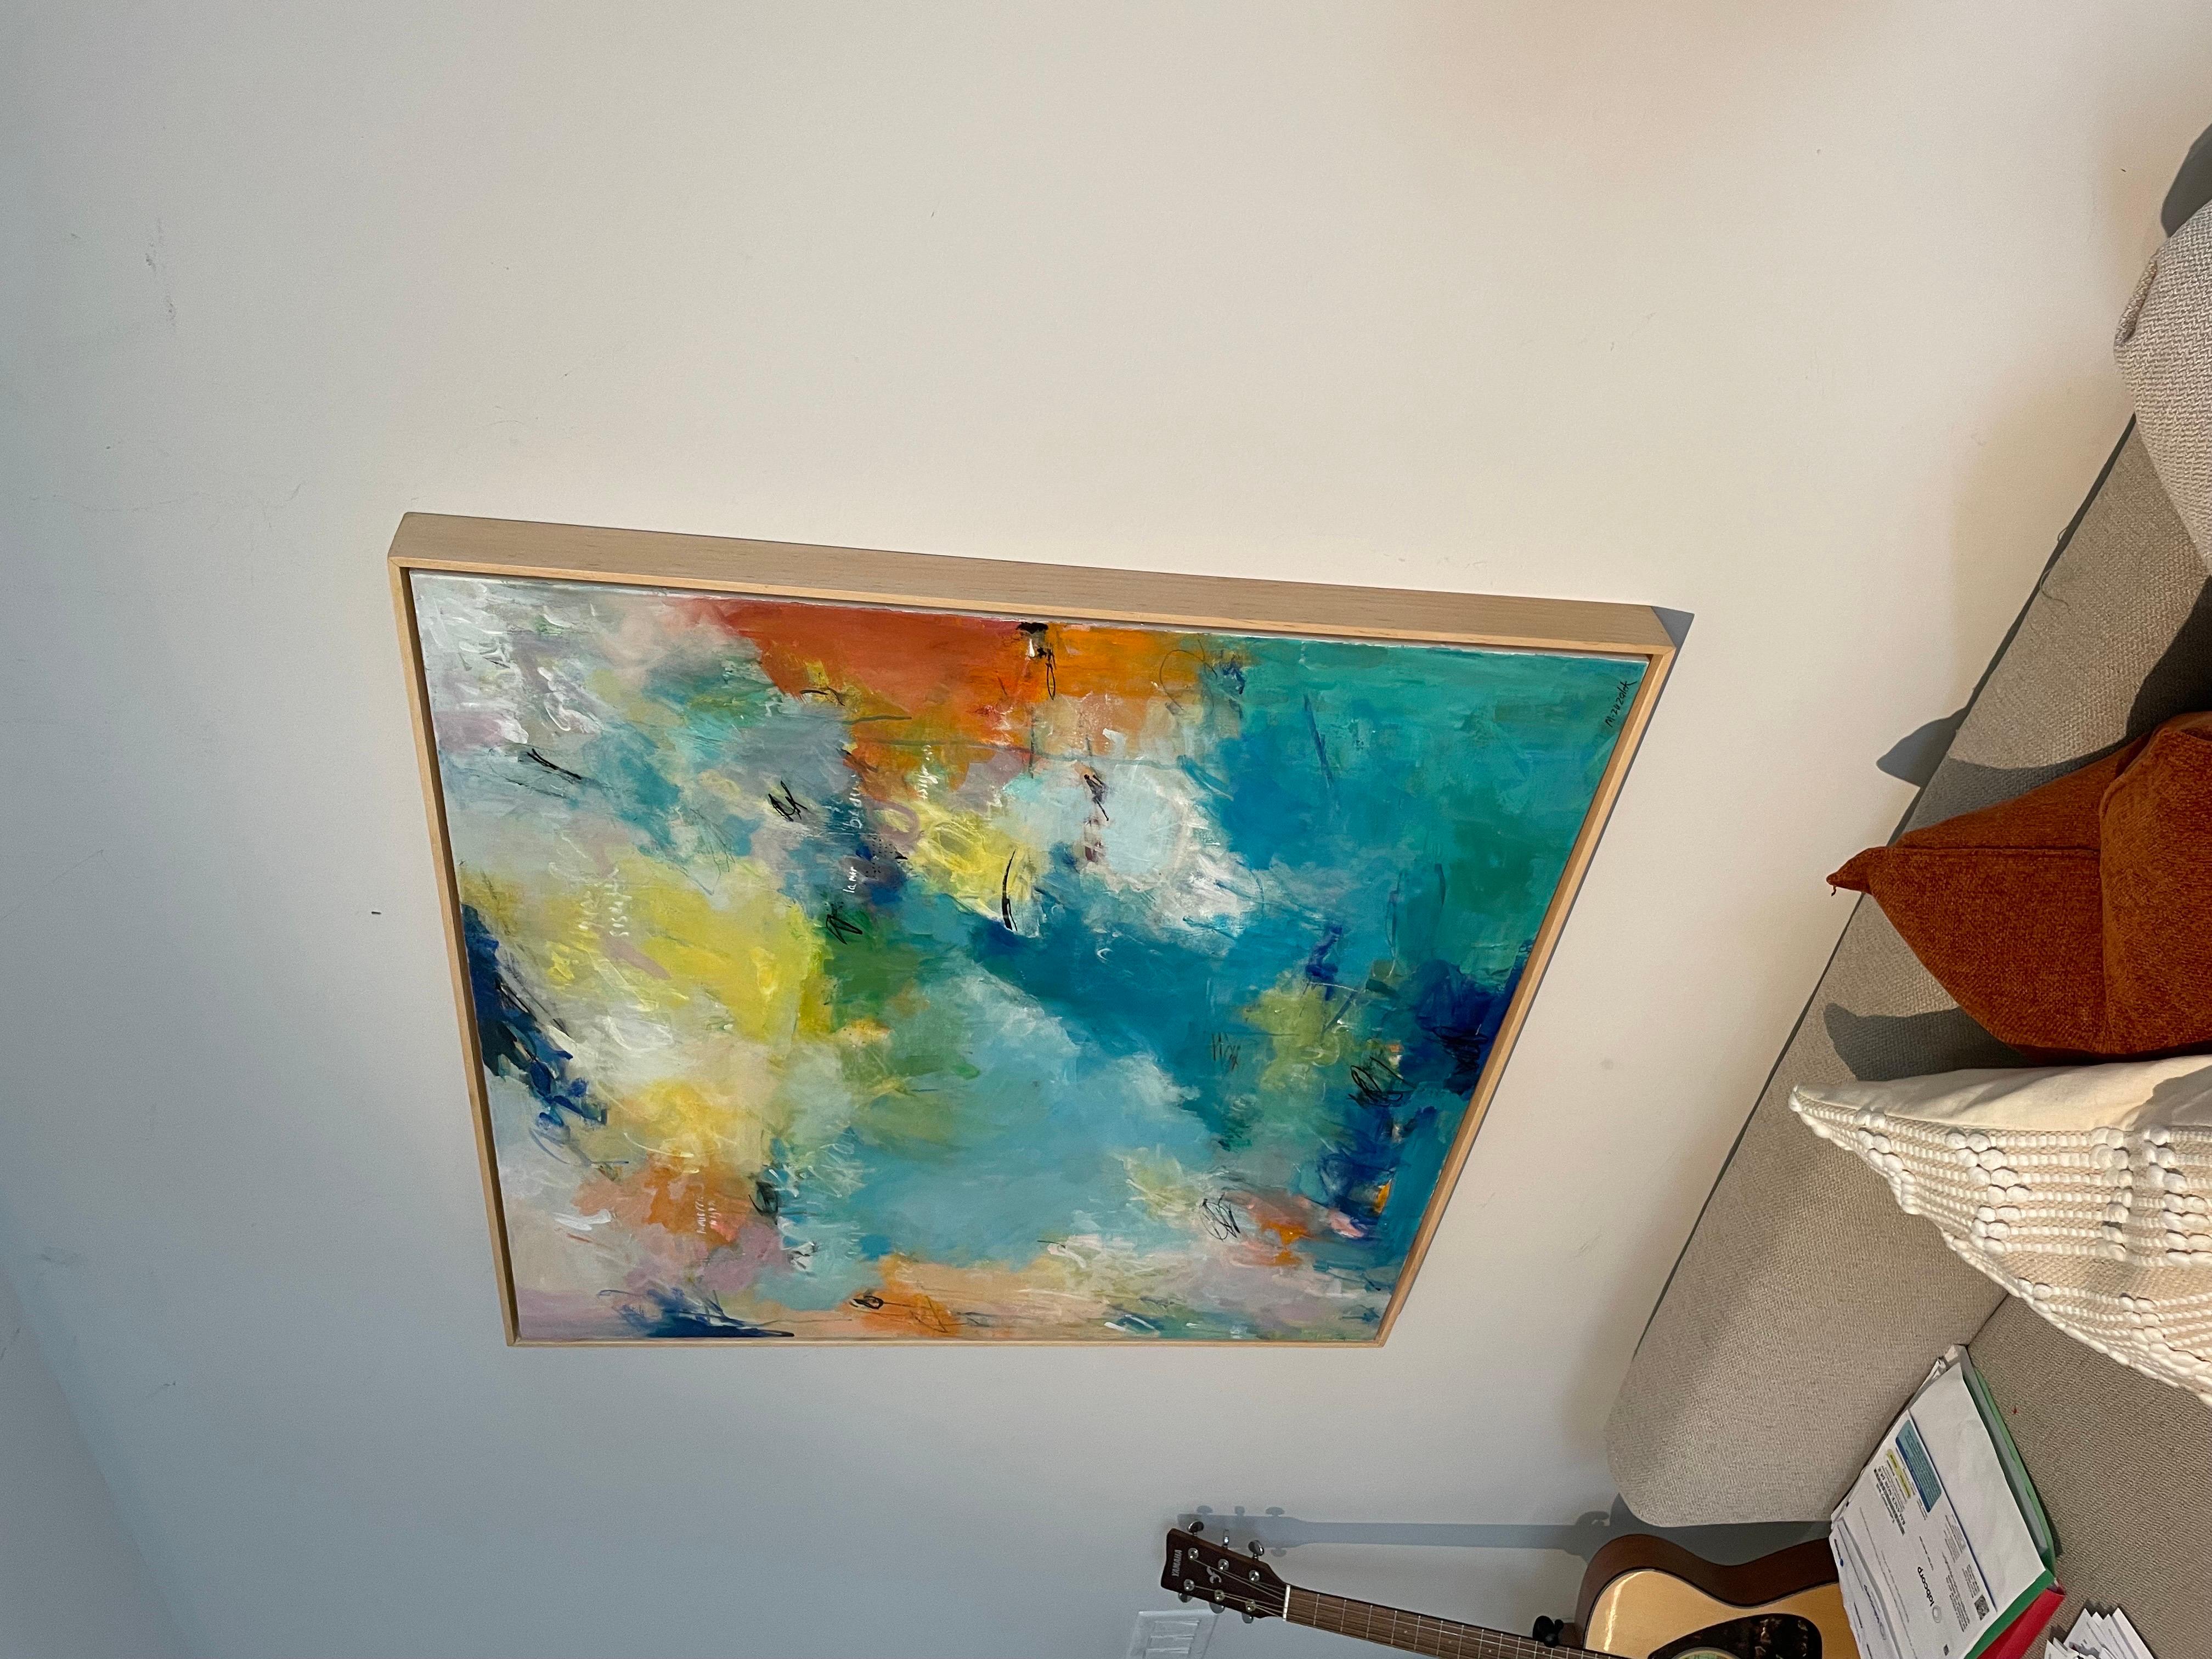 This large abstract painting titled Sea Between.

